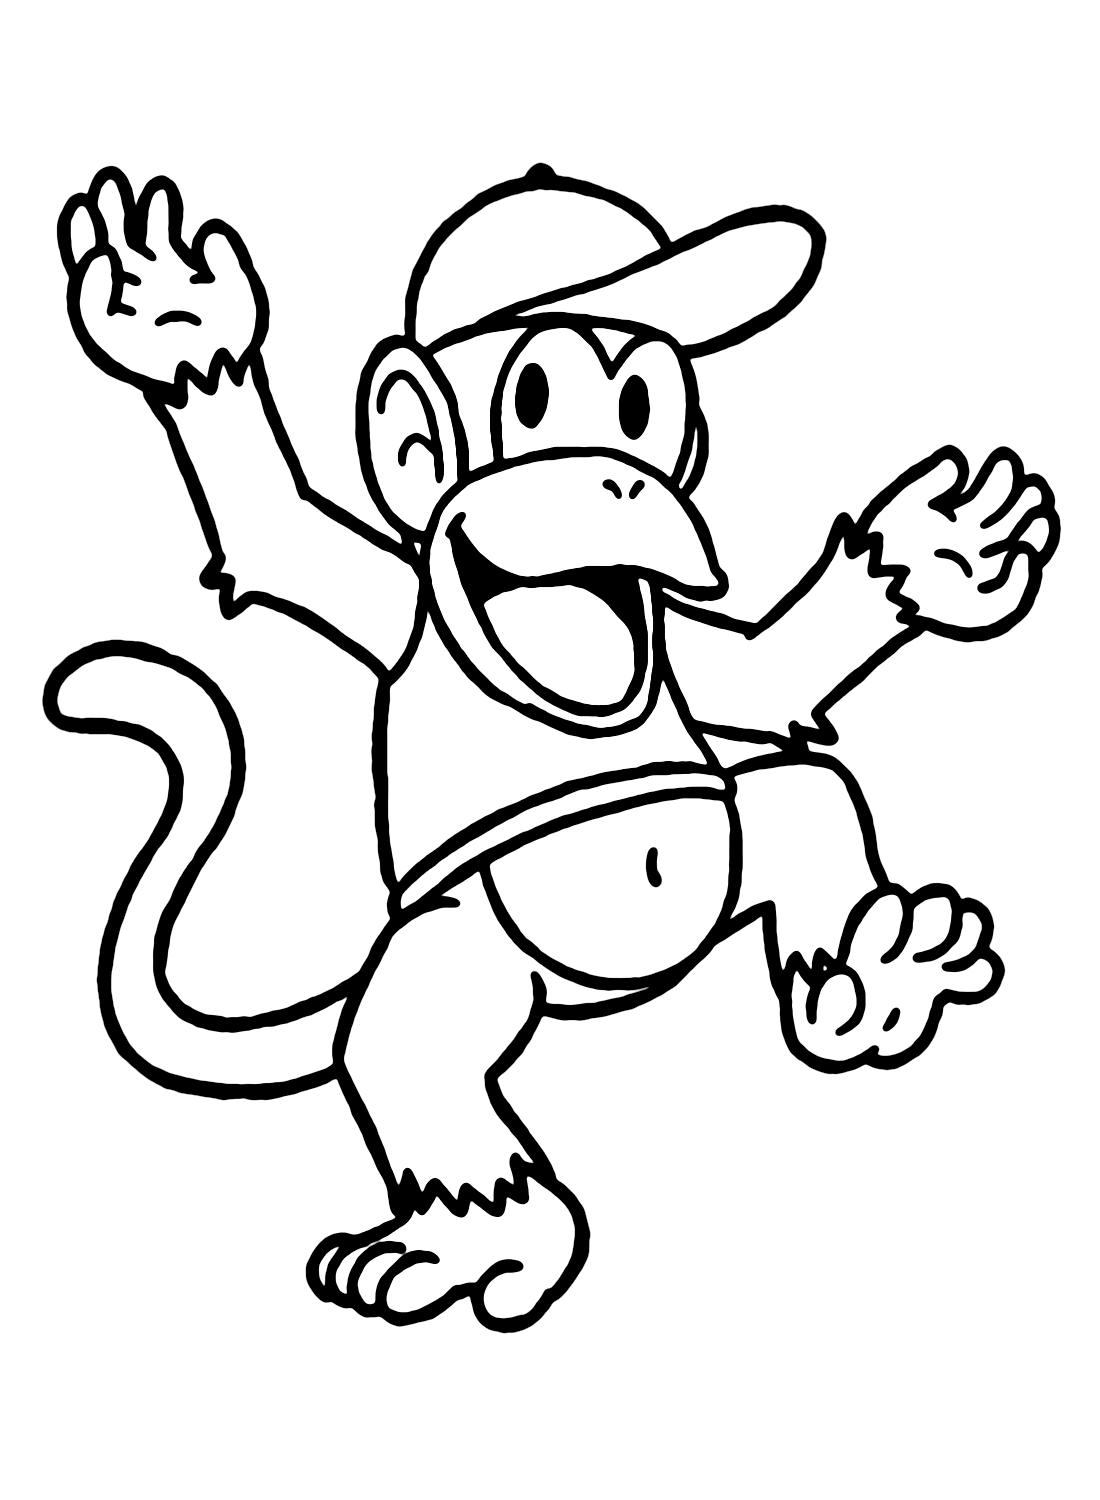 Happy Diddy Kong from Diddy Kong